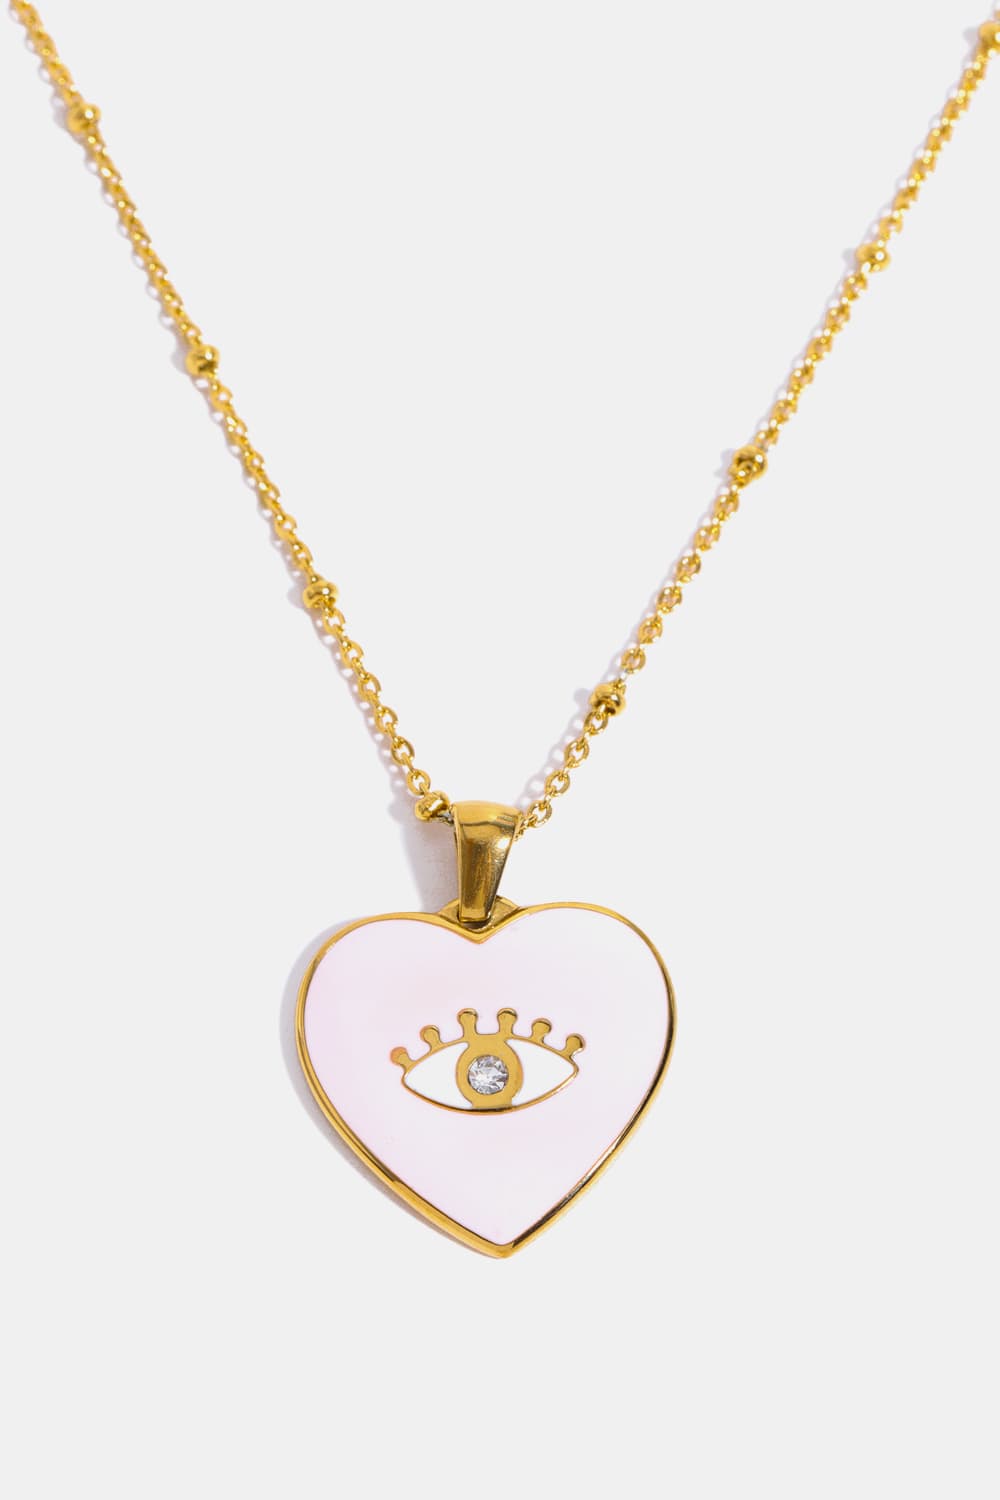 Trendsi Cupid Beauty Supplies Blush Pink / One Size Women Necklace Heart & Evil Eye Shape 18K Gold Plated Pendant Necklace